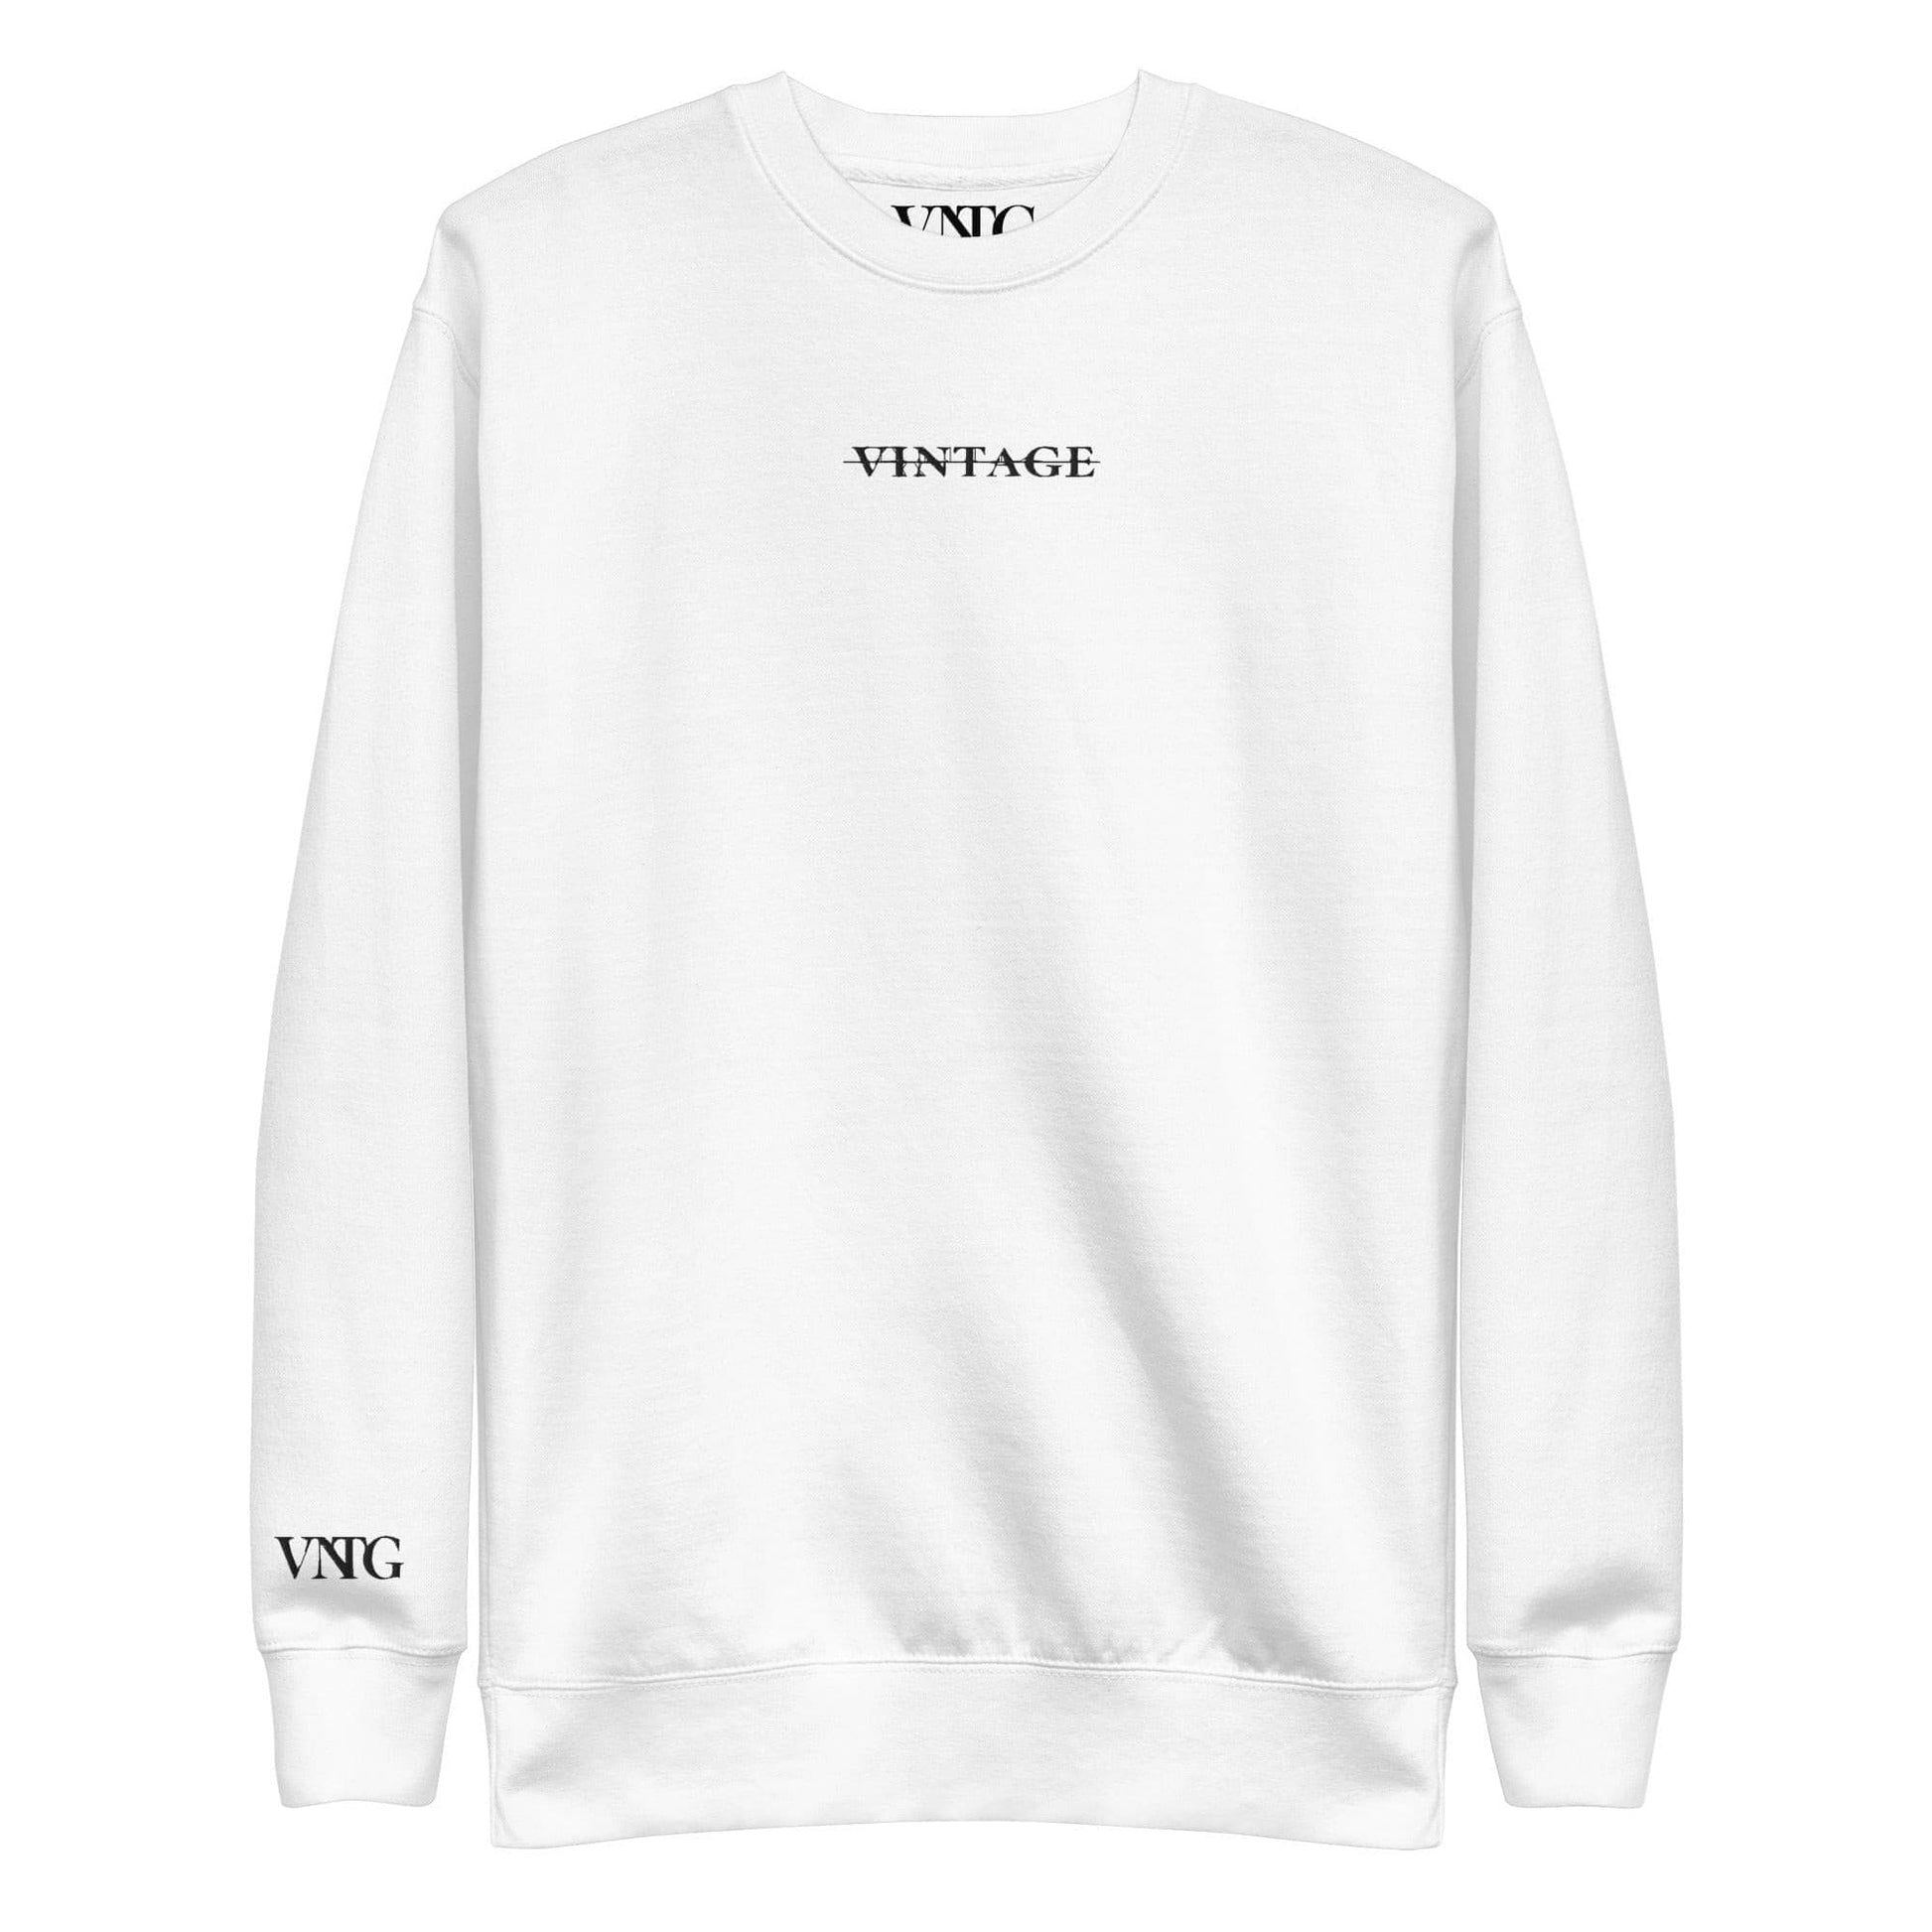 DELUSION EMBROIDERED SWEATER WHITE - VINTAGE APPAREL